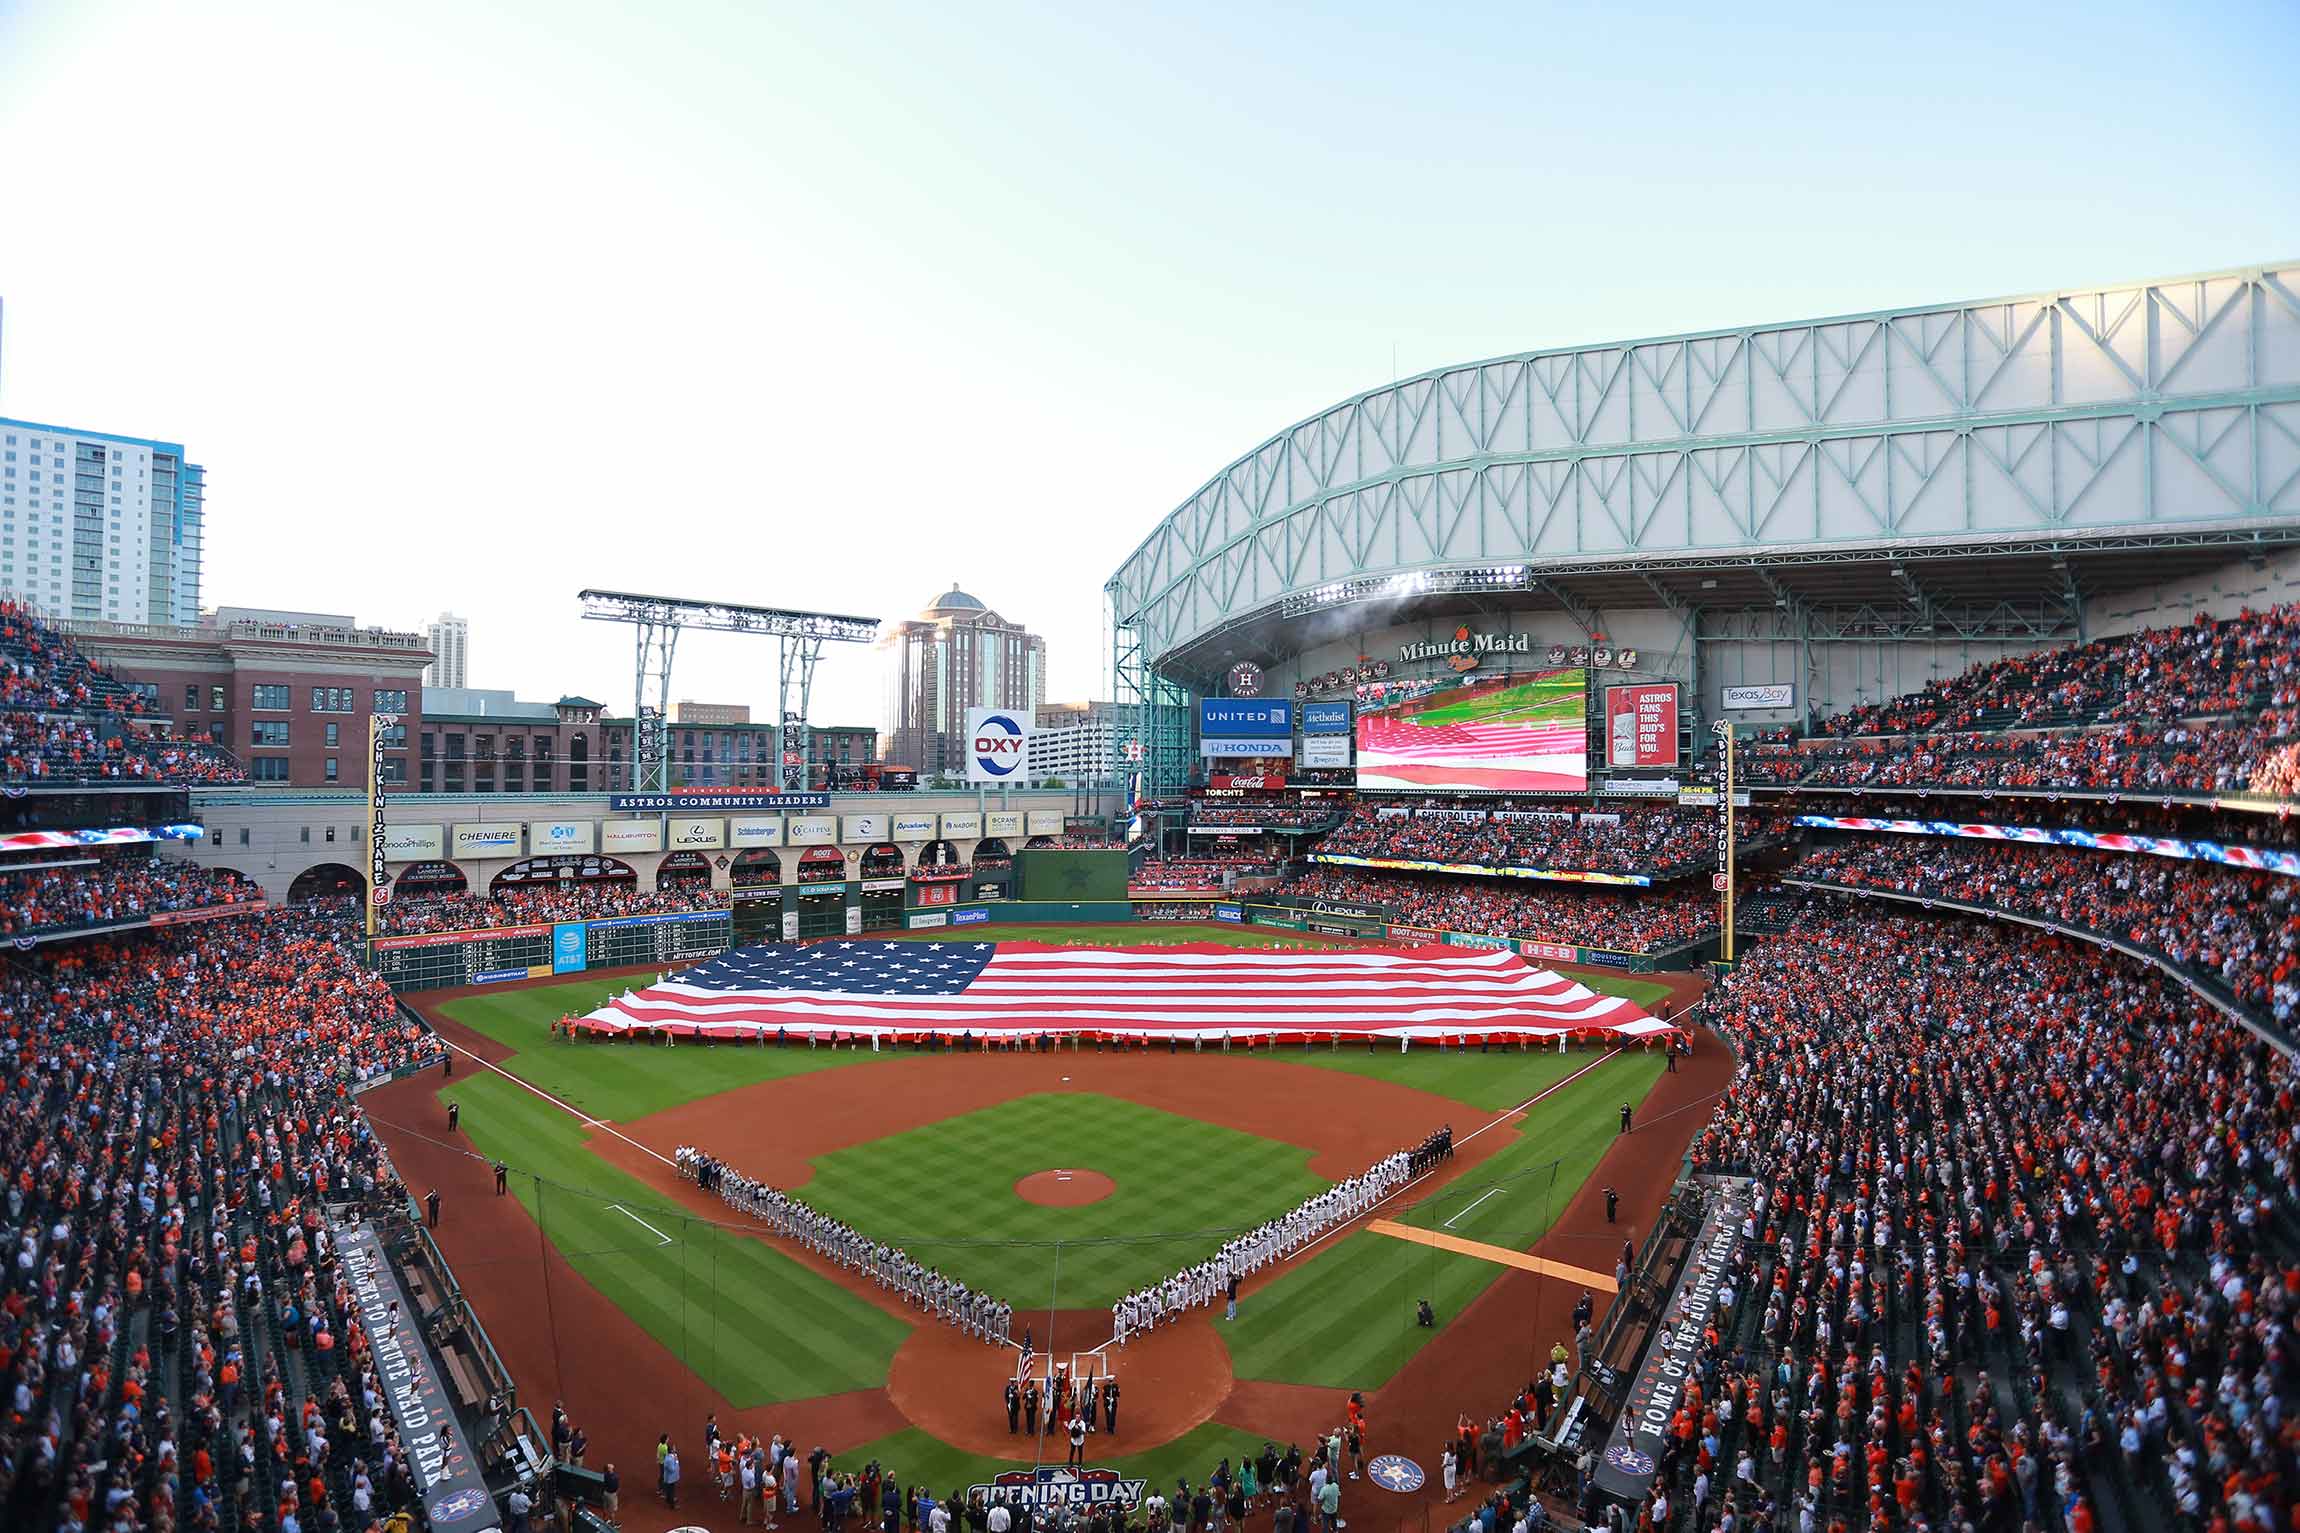 Ole Miss to play in Houston, TX inside Minute Maid Park